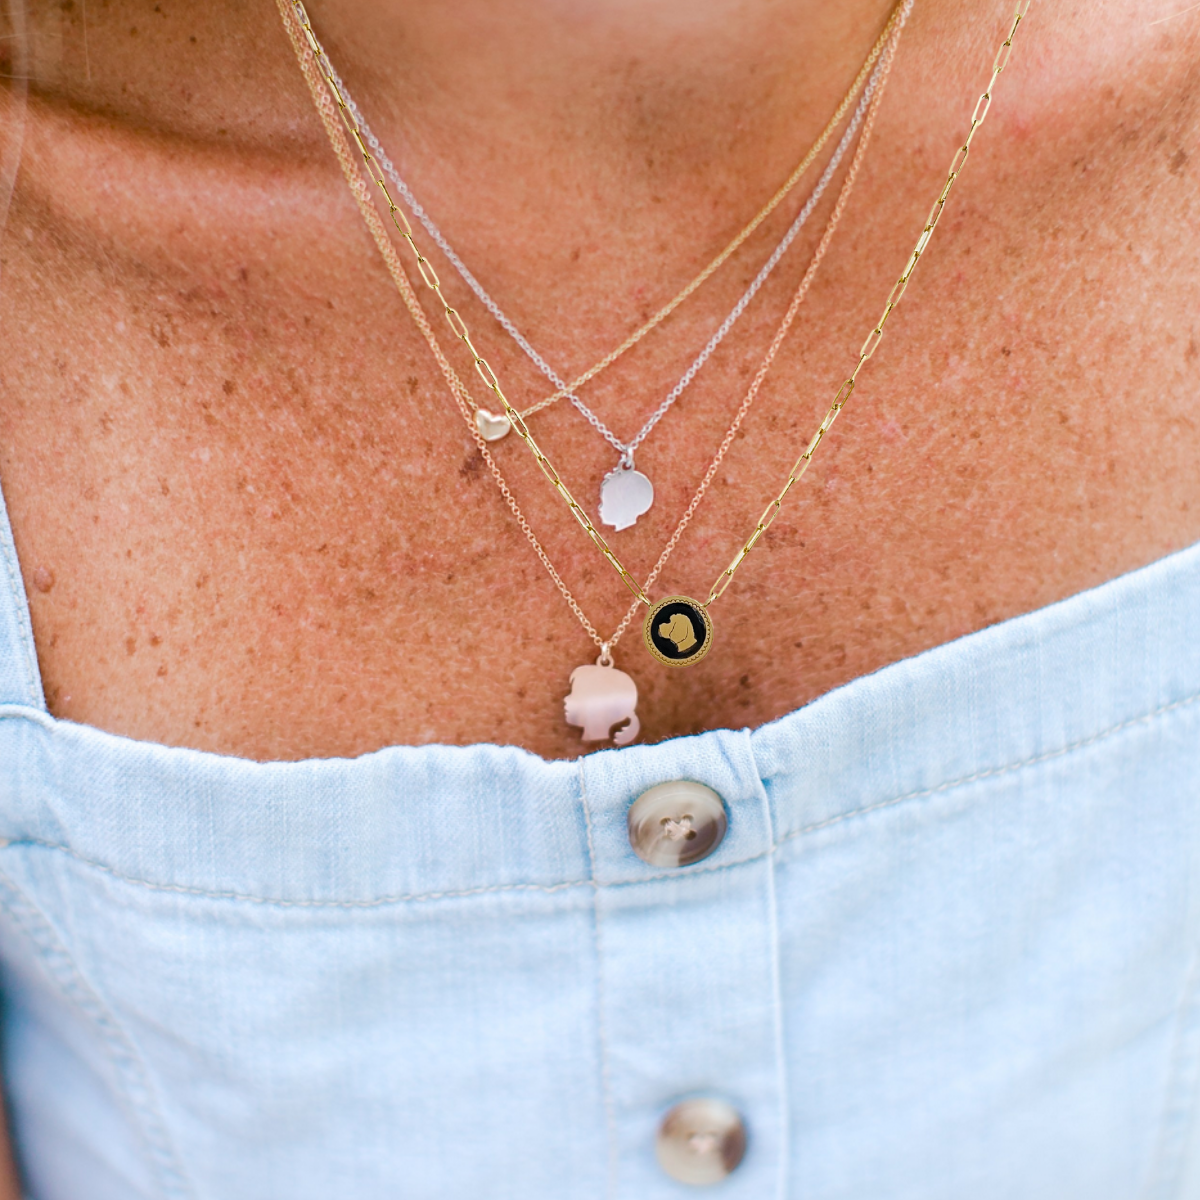 Petite Enamel Pendant Necklace layered with other dainty necklaces